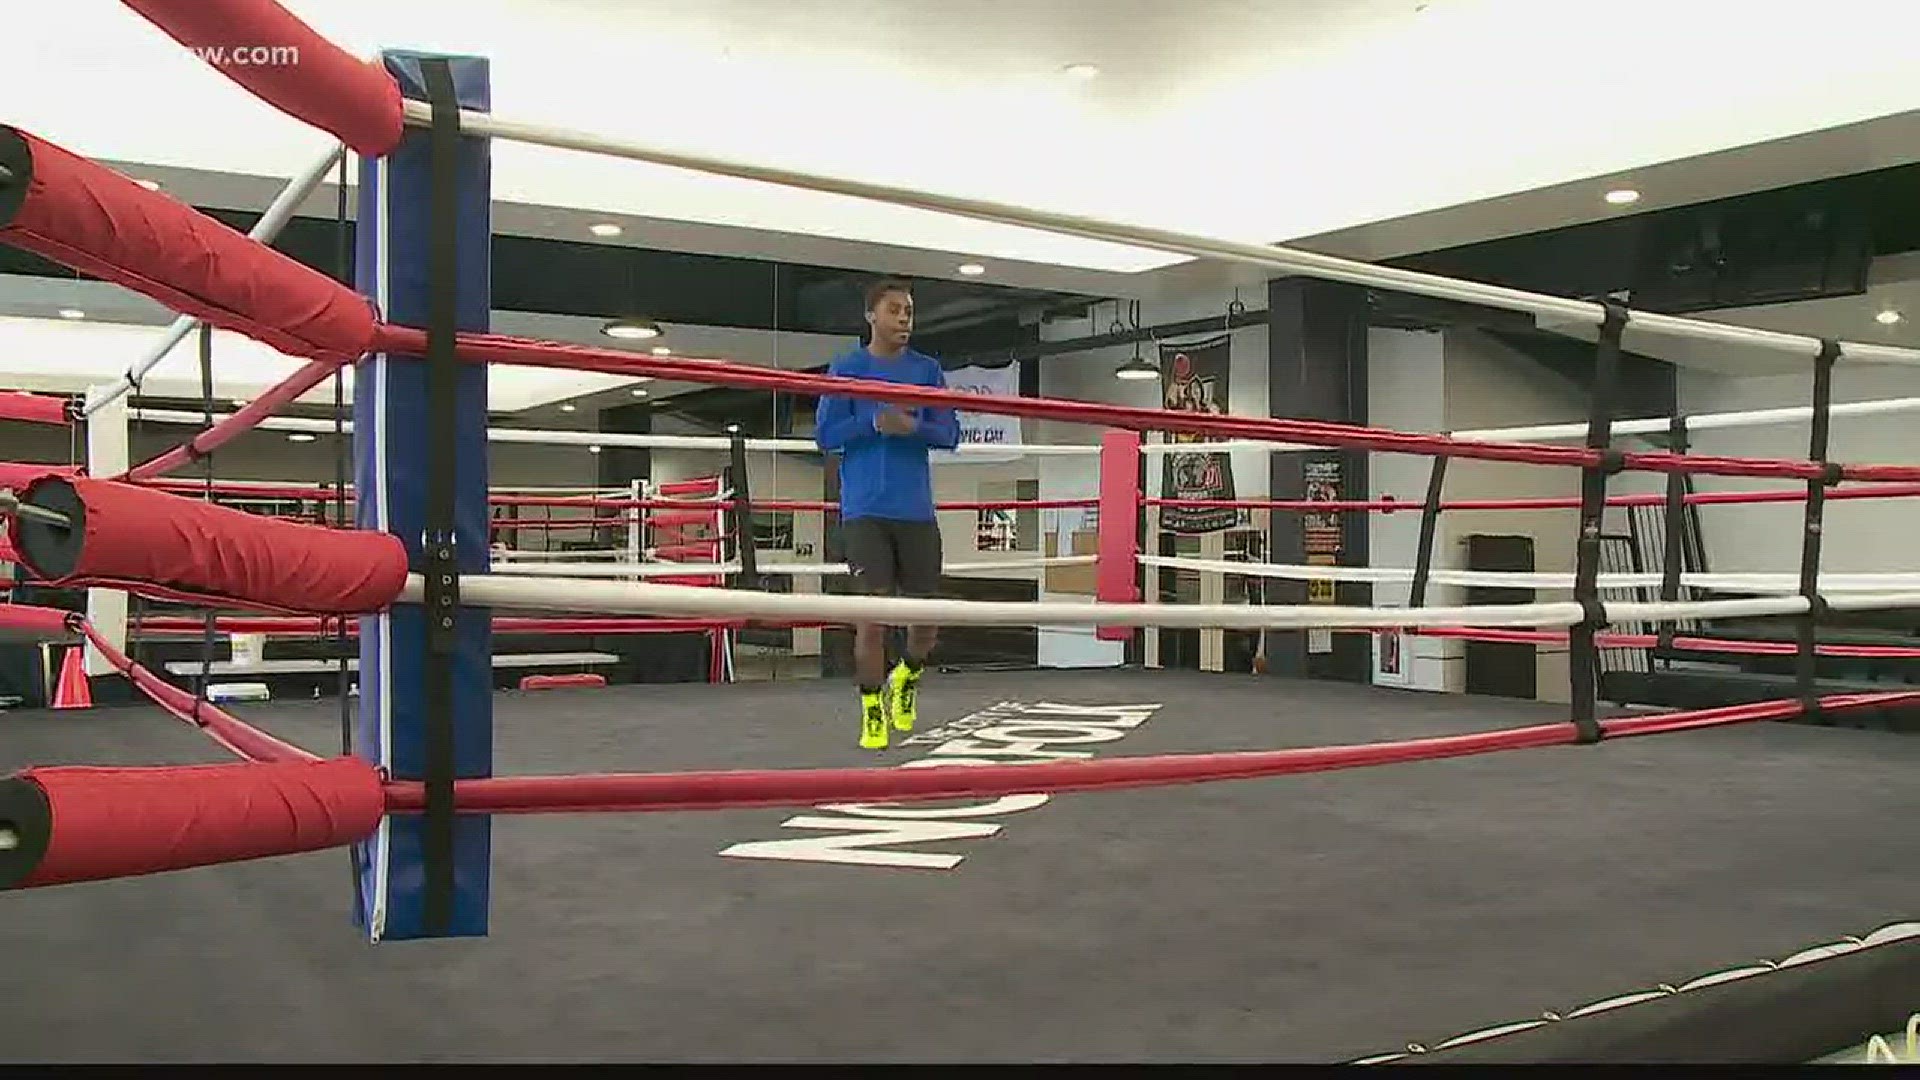 Davis, a Norfolk native, is already on the USA Boxing Elite team. Odds are pretty strong that he'll box his way to Tokyo in 2020.